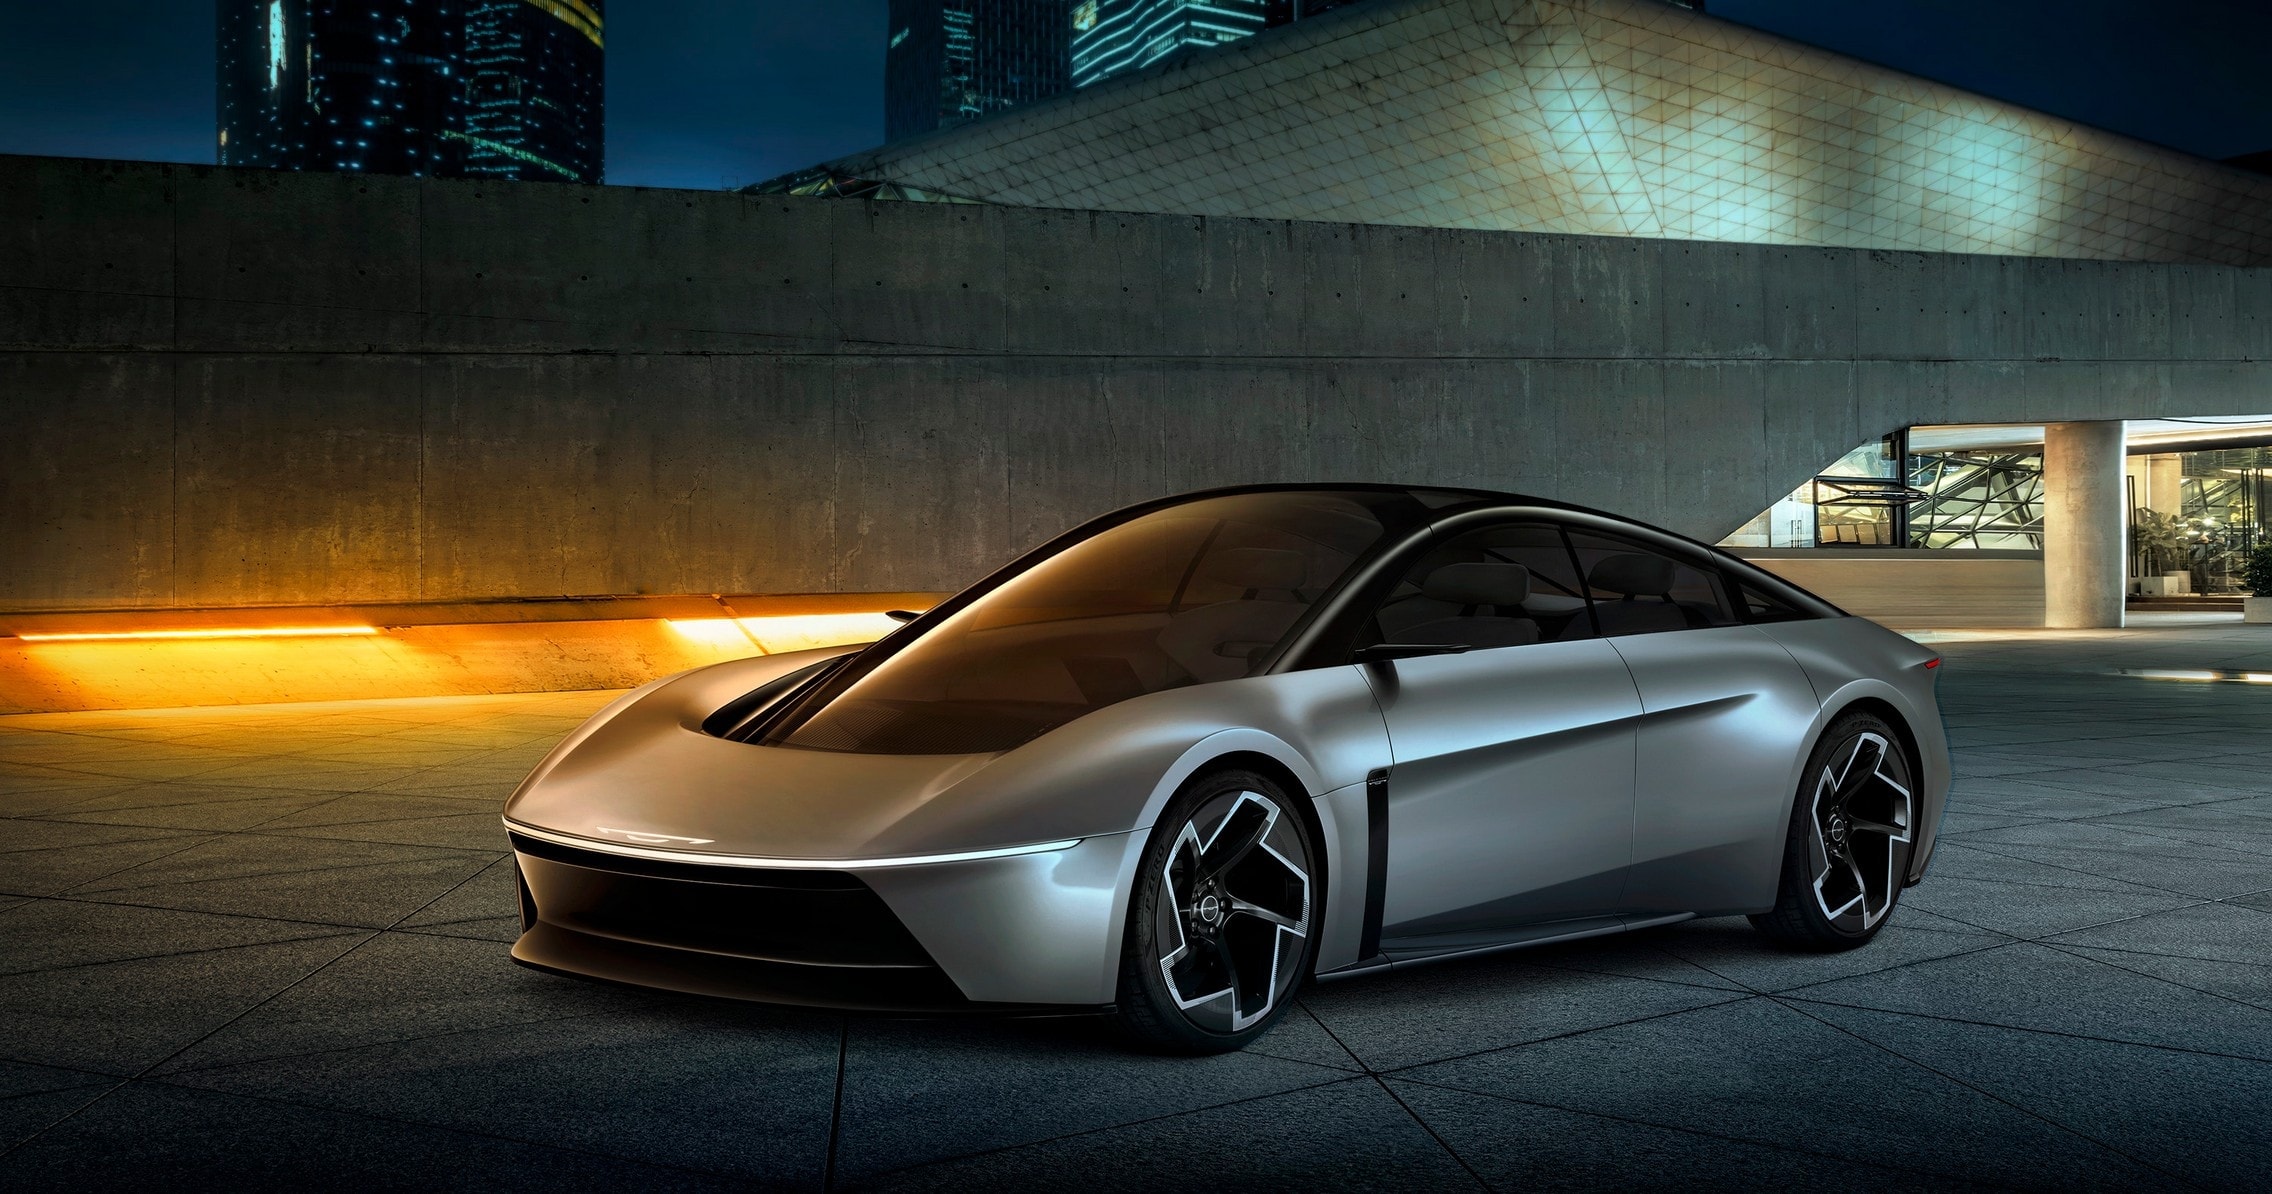 Chrysler Halcyon Is the World's Only EV Designed for Unlimited Range ...